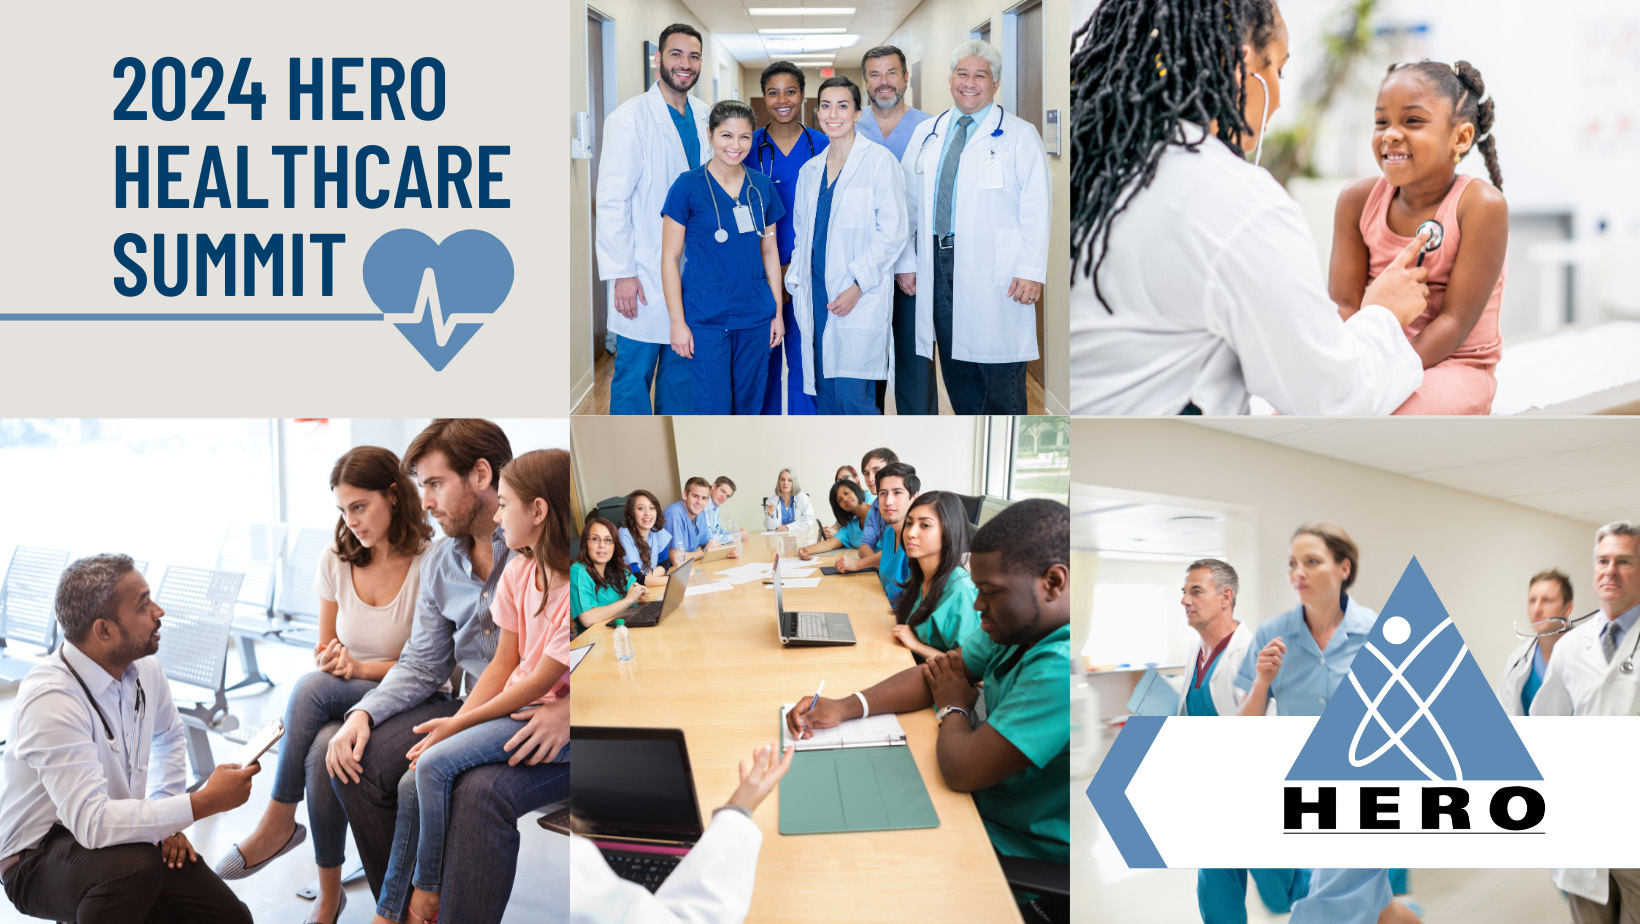 2024 HERO Healthcare Summit with HERO logo and photos of people in the healthcare industry